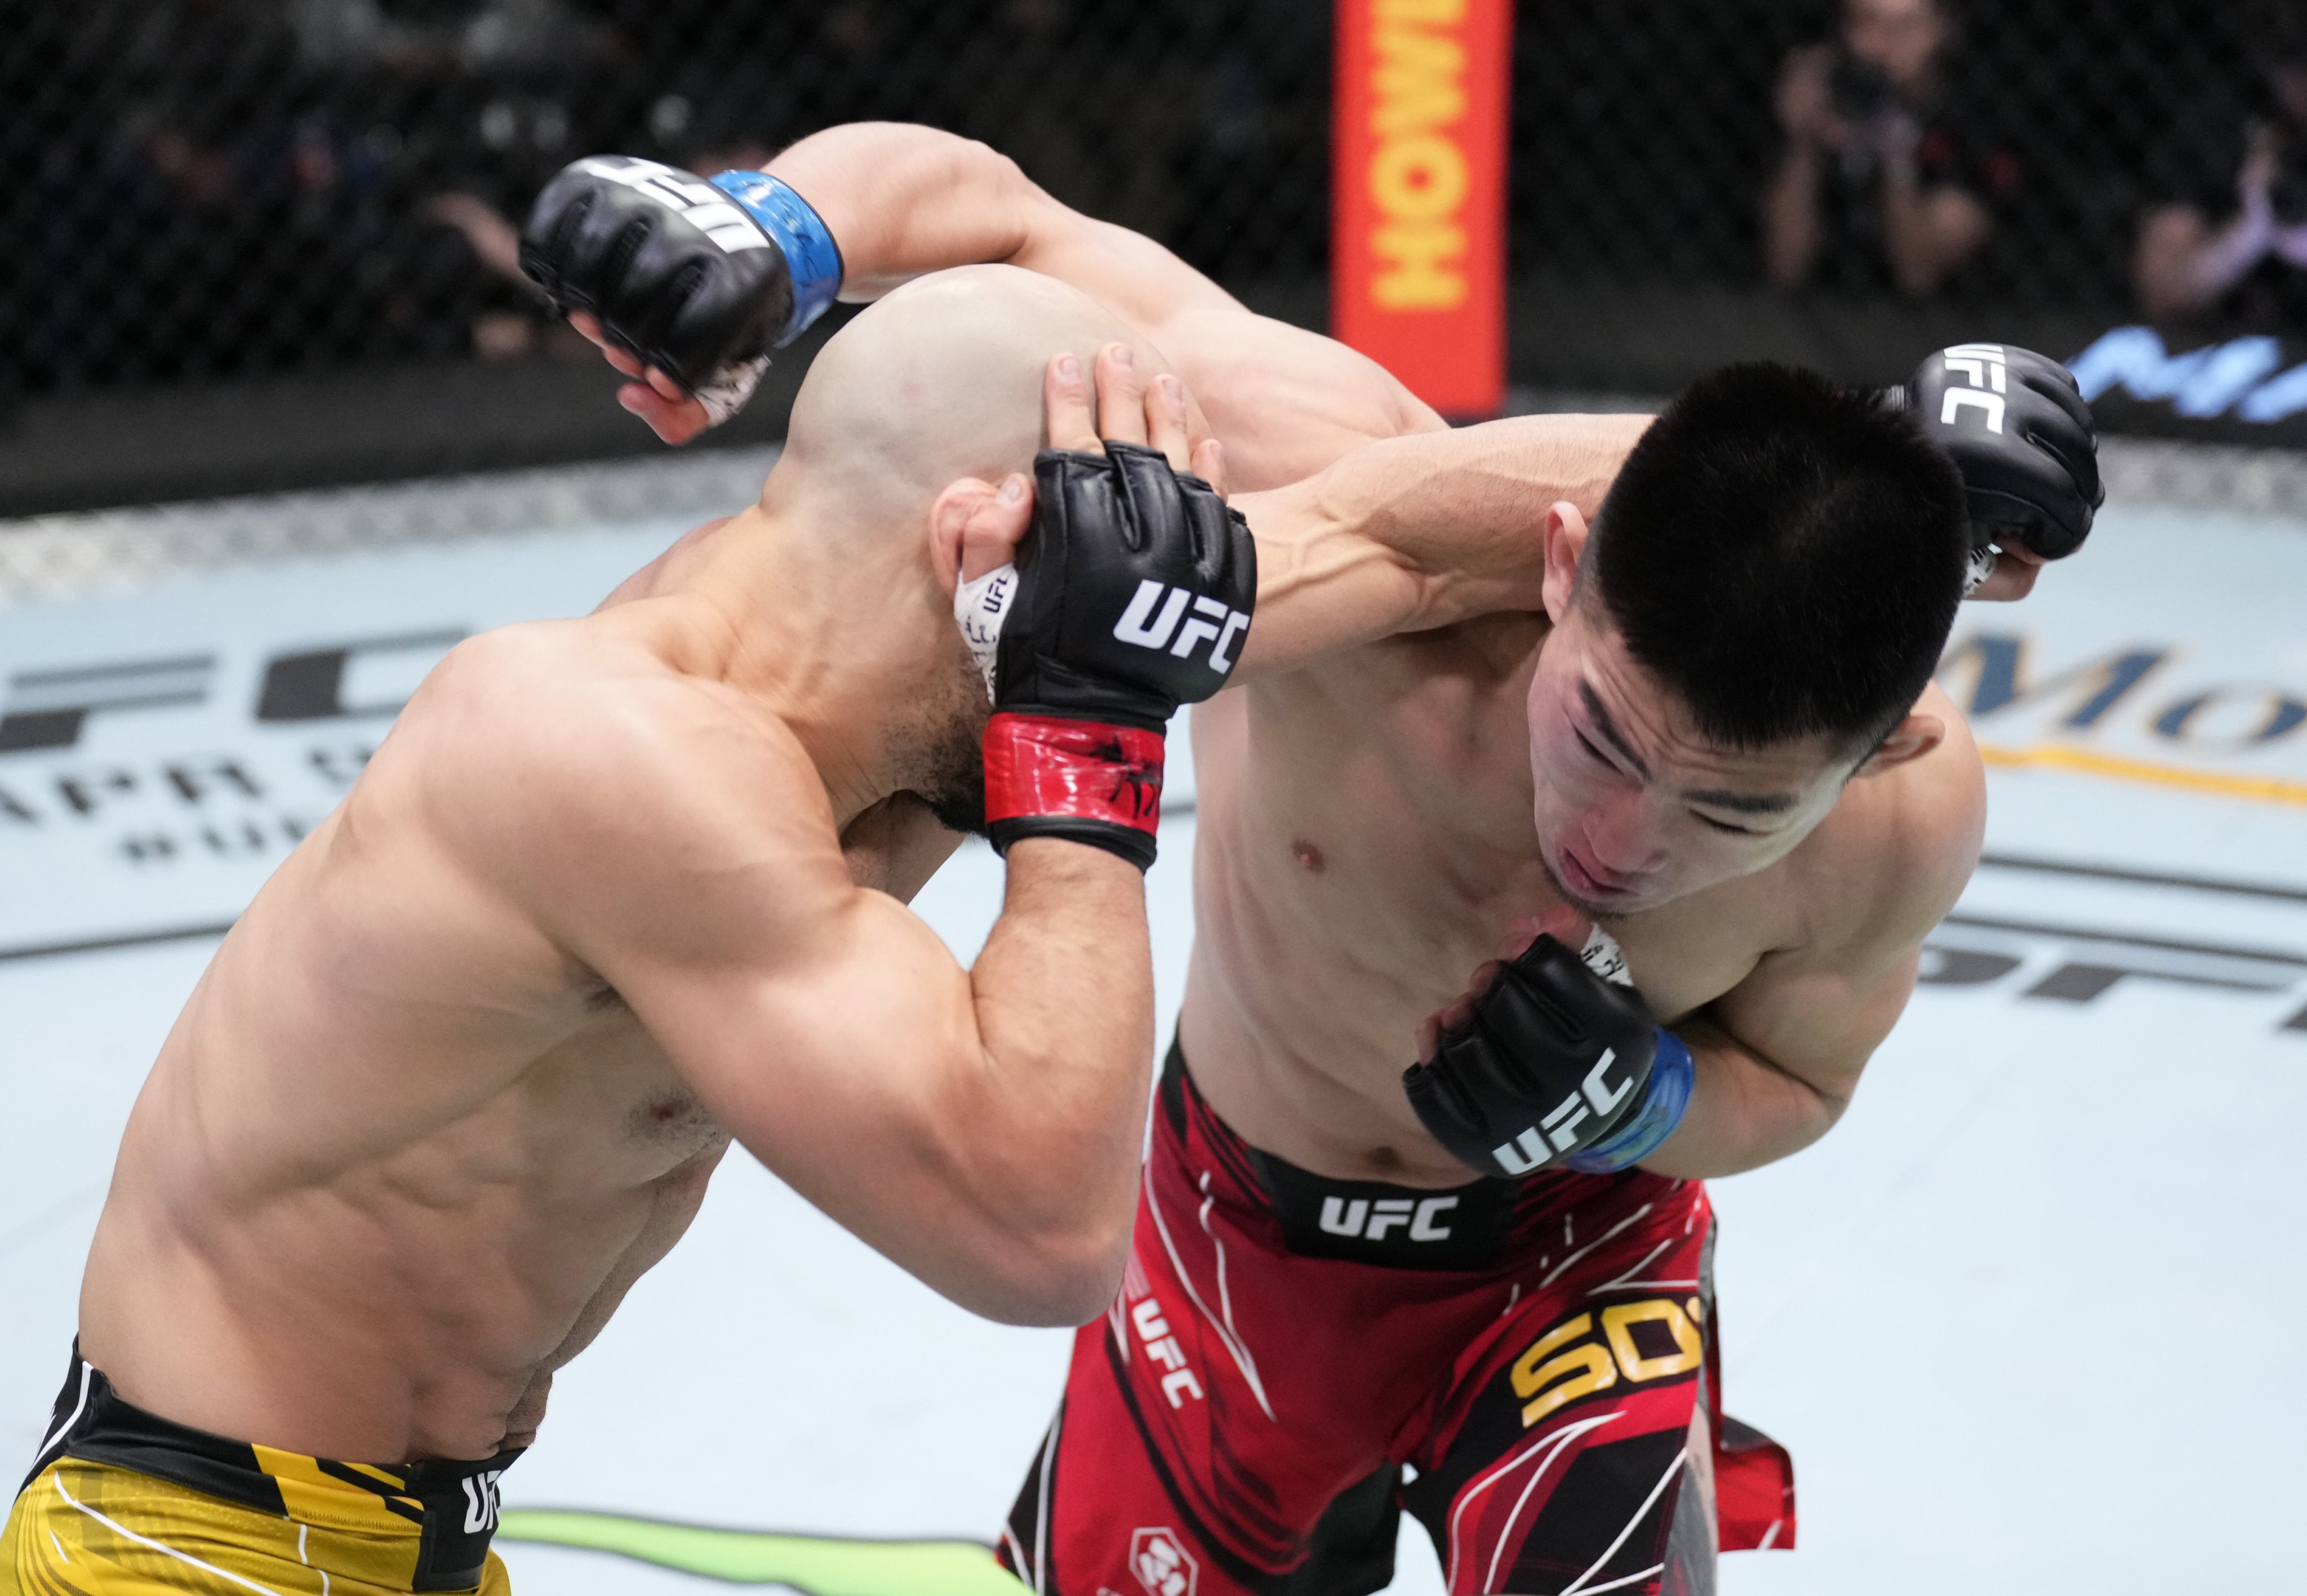 Song Yadong of China (right) and Marlon Moraes of Brazil trade punches in their bantamweight fight on March 12, 2022 in Las Vegas, Nevada. Photo: Chris Unger/Zuffa LLC